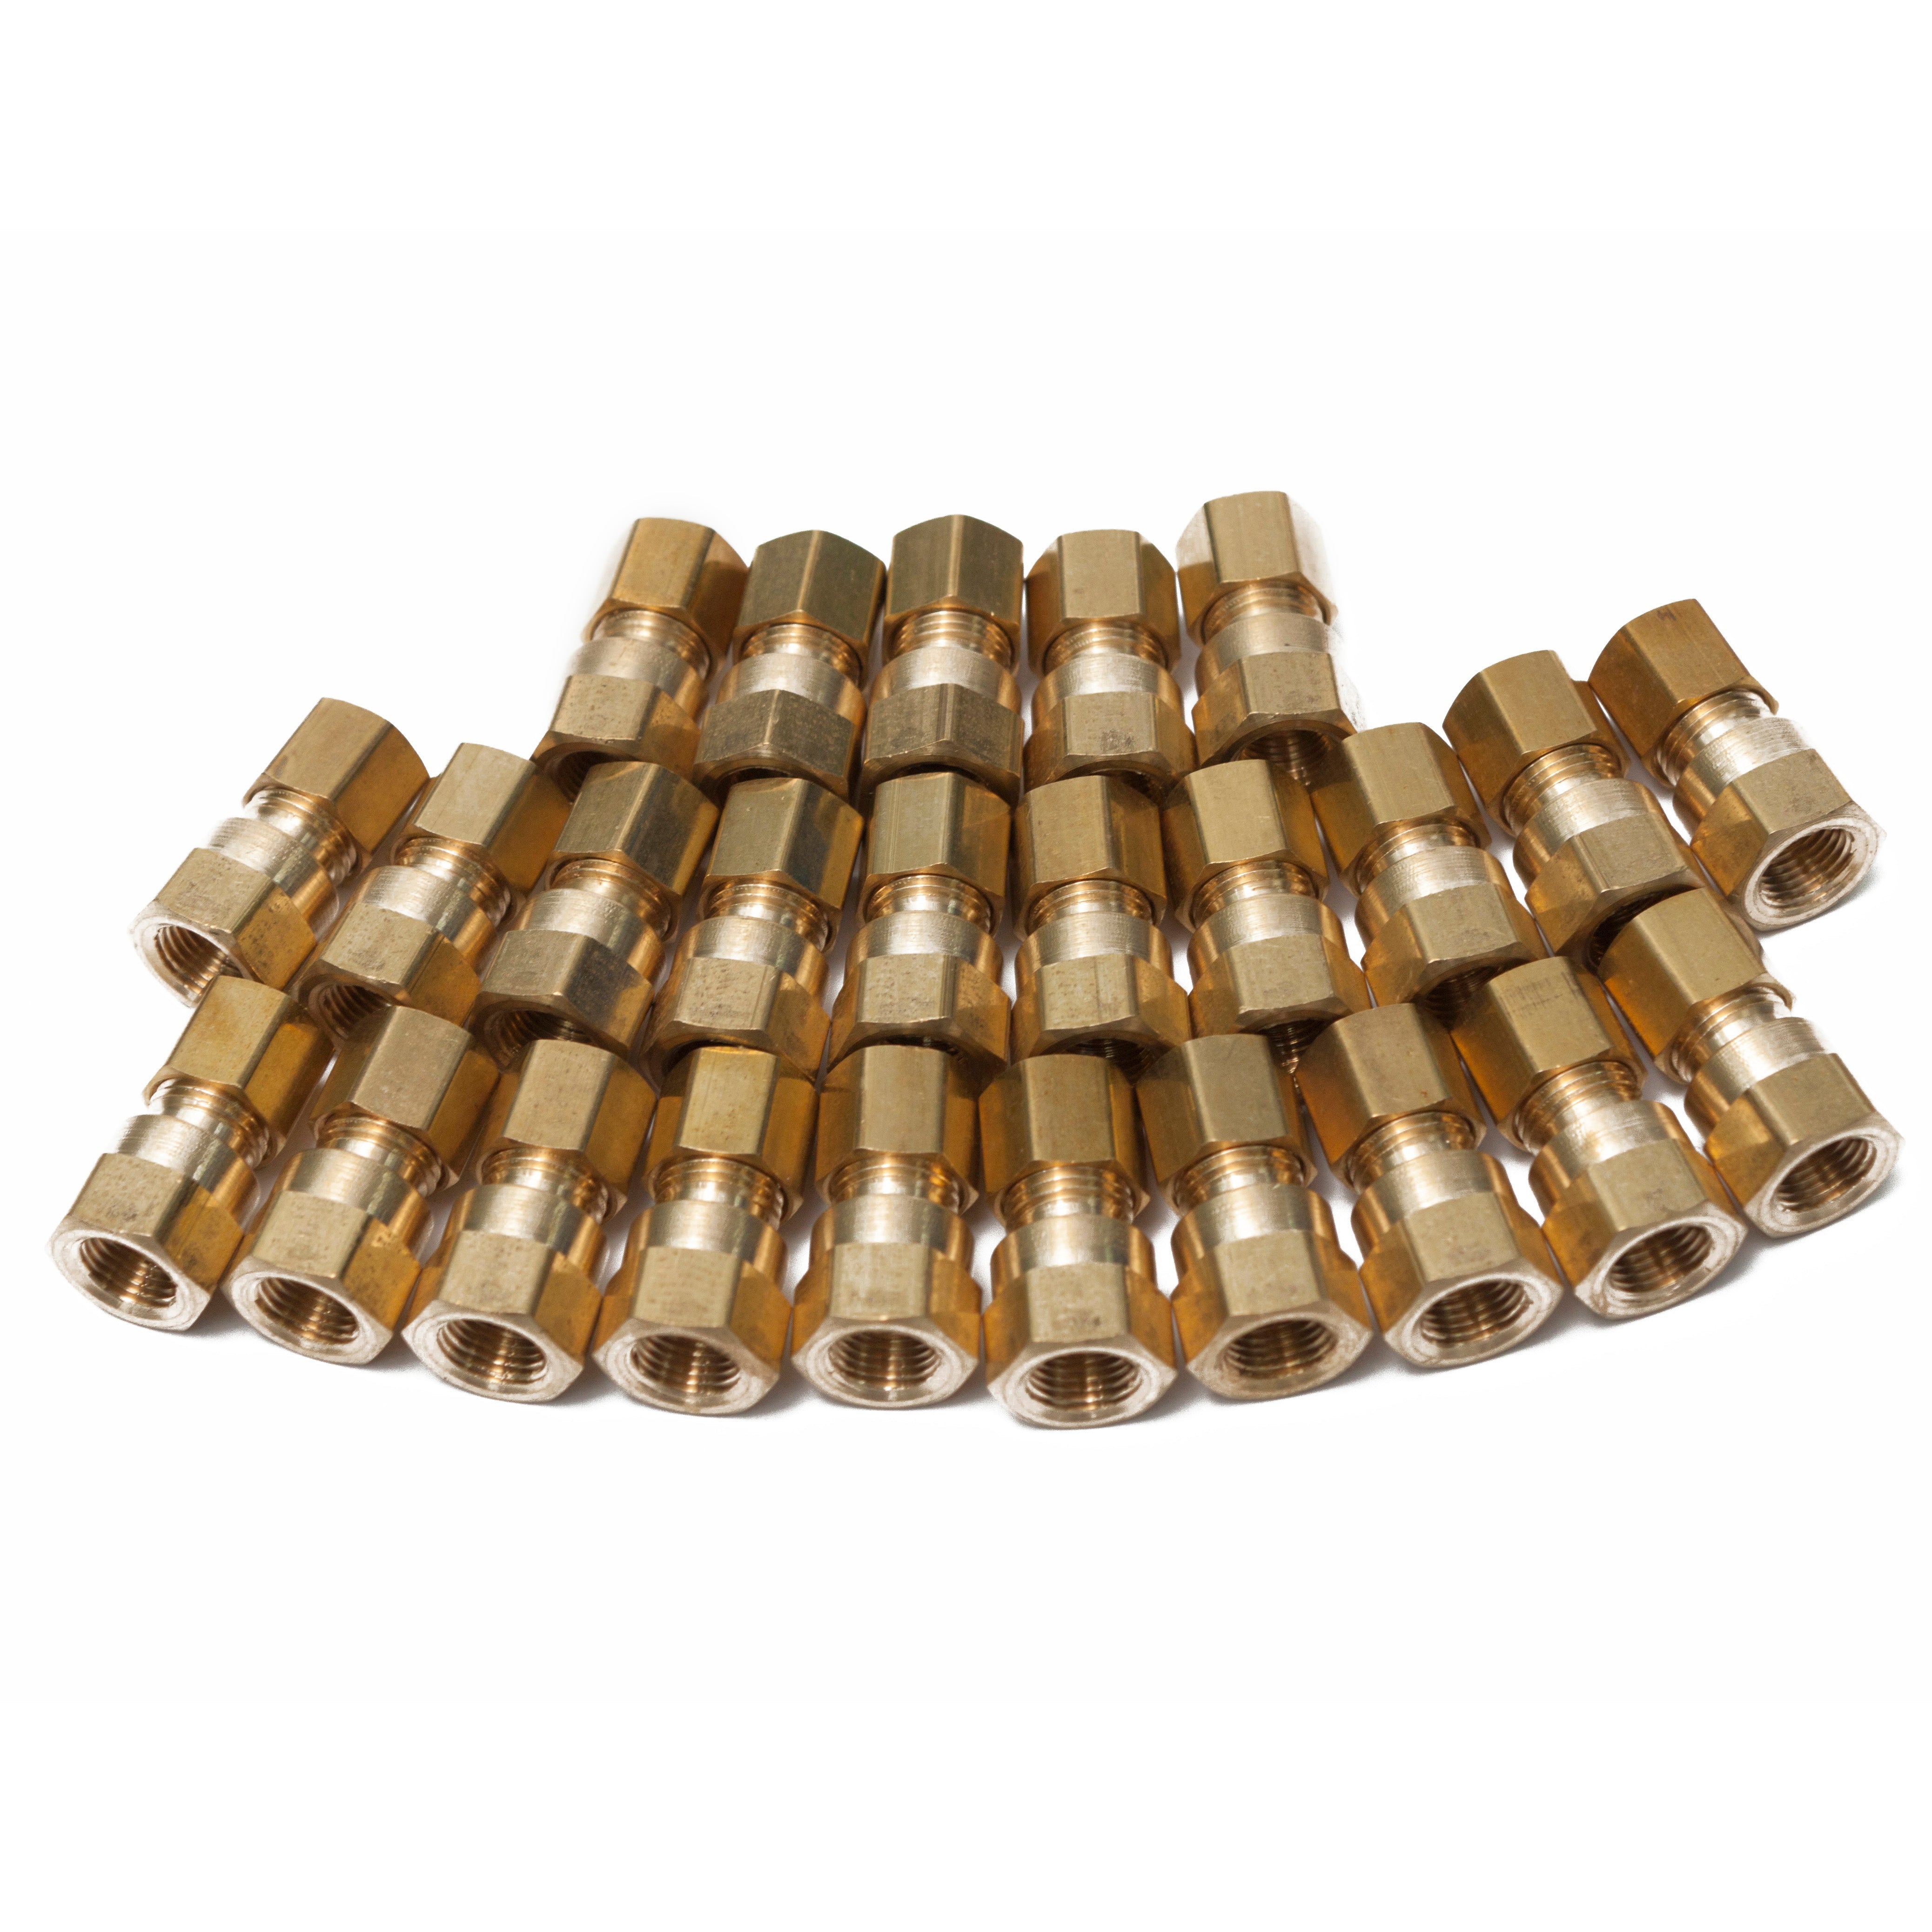 LTWFITTING Brass 1/4-Inch OD x 1/4-Inch Female NPT Compression Connector Fitting(Pack of 5)